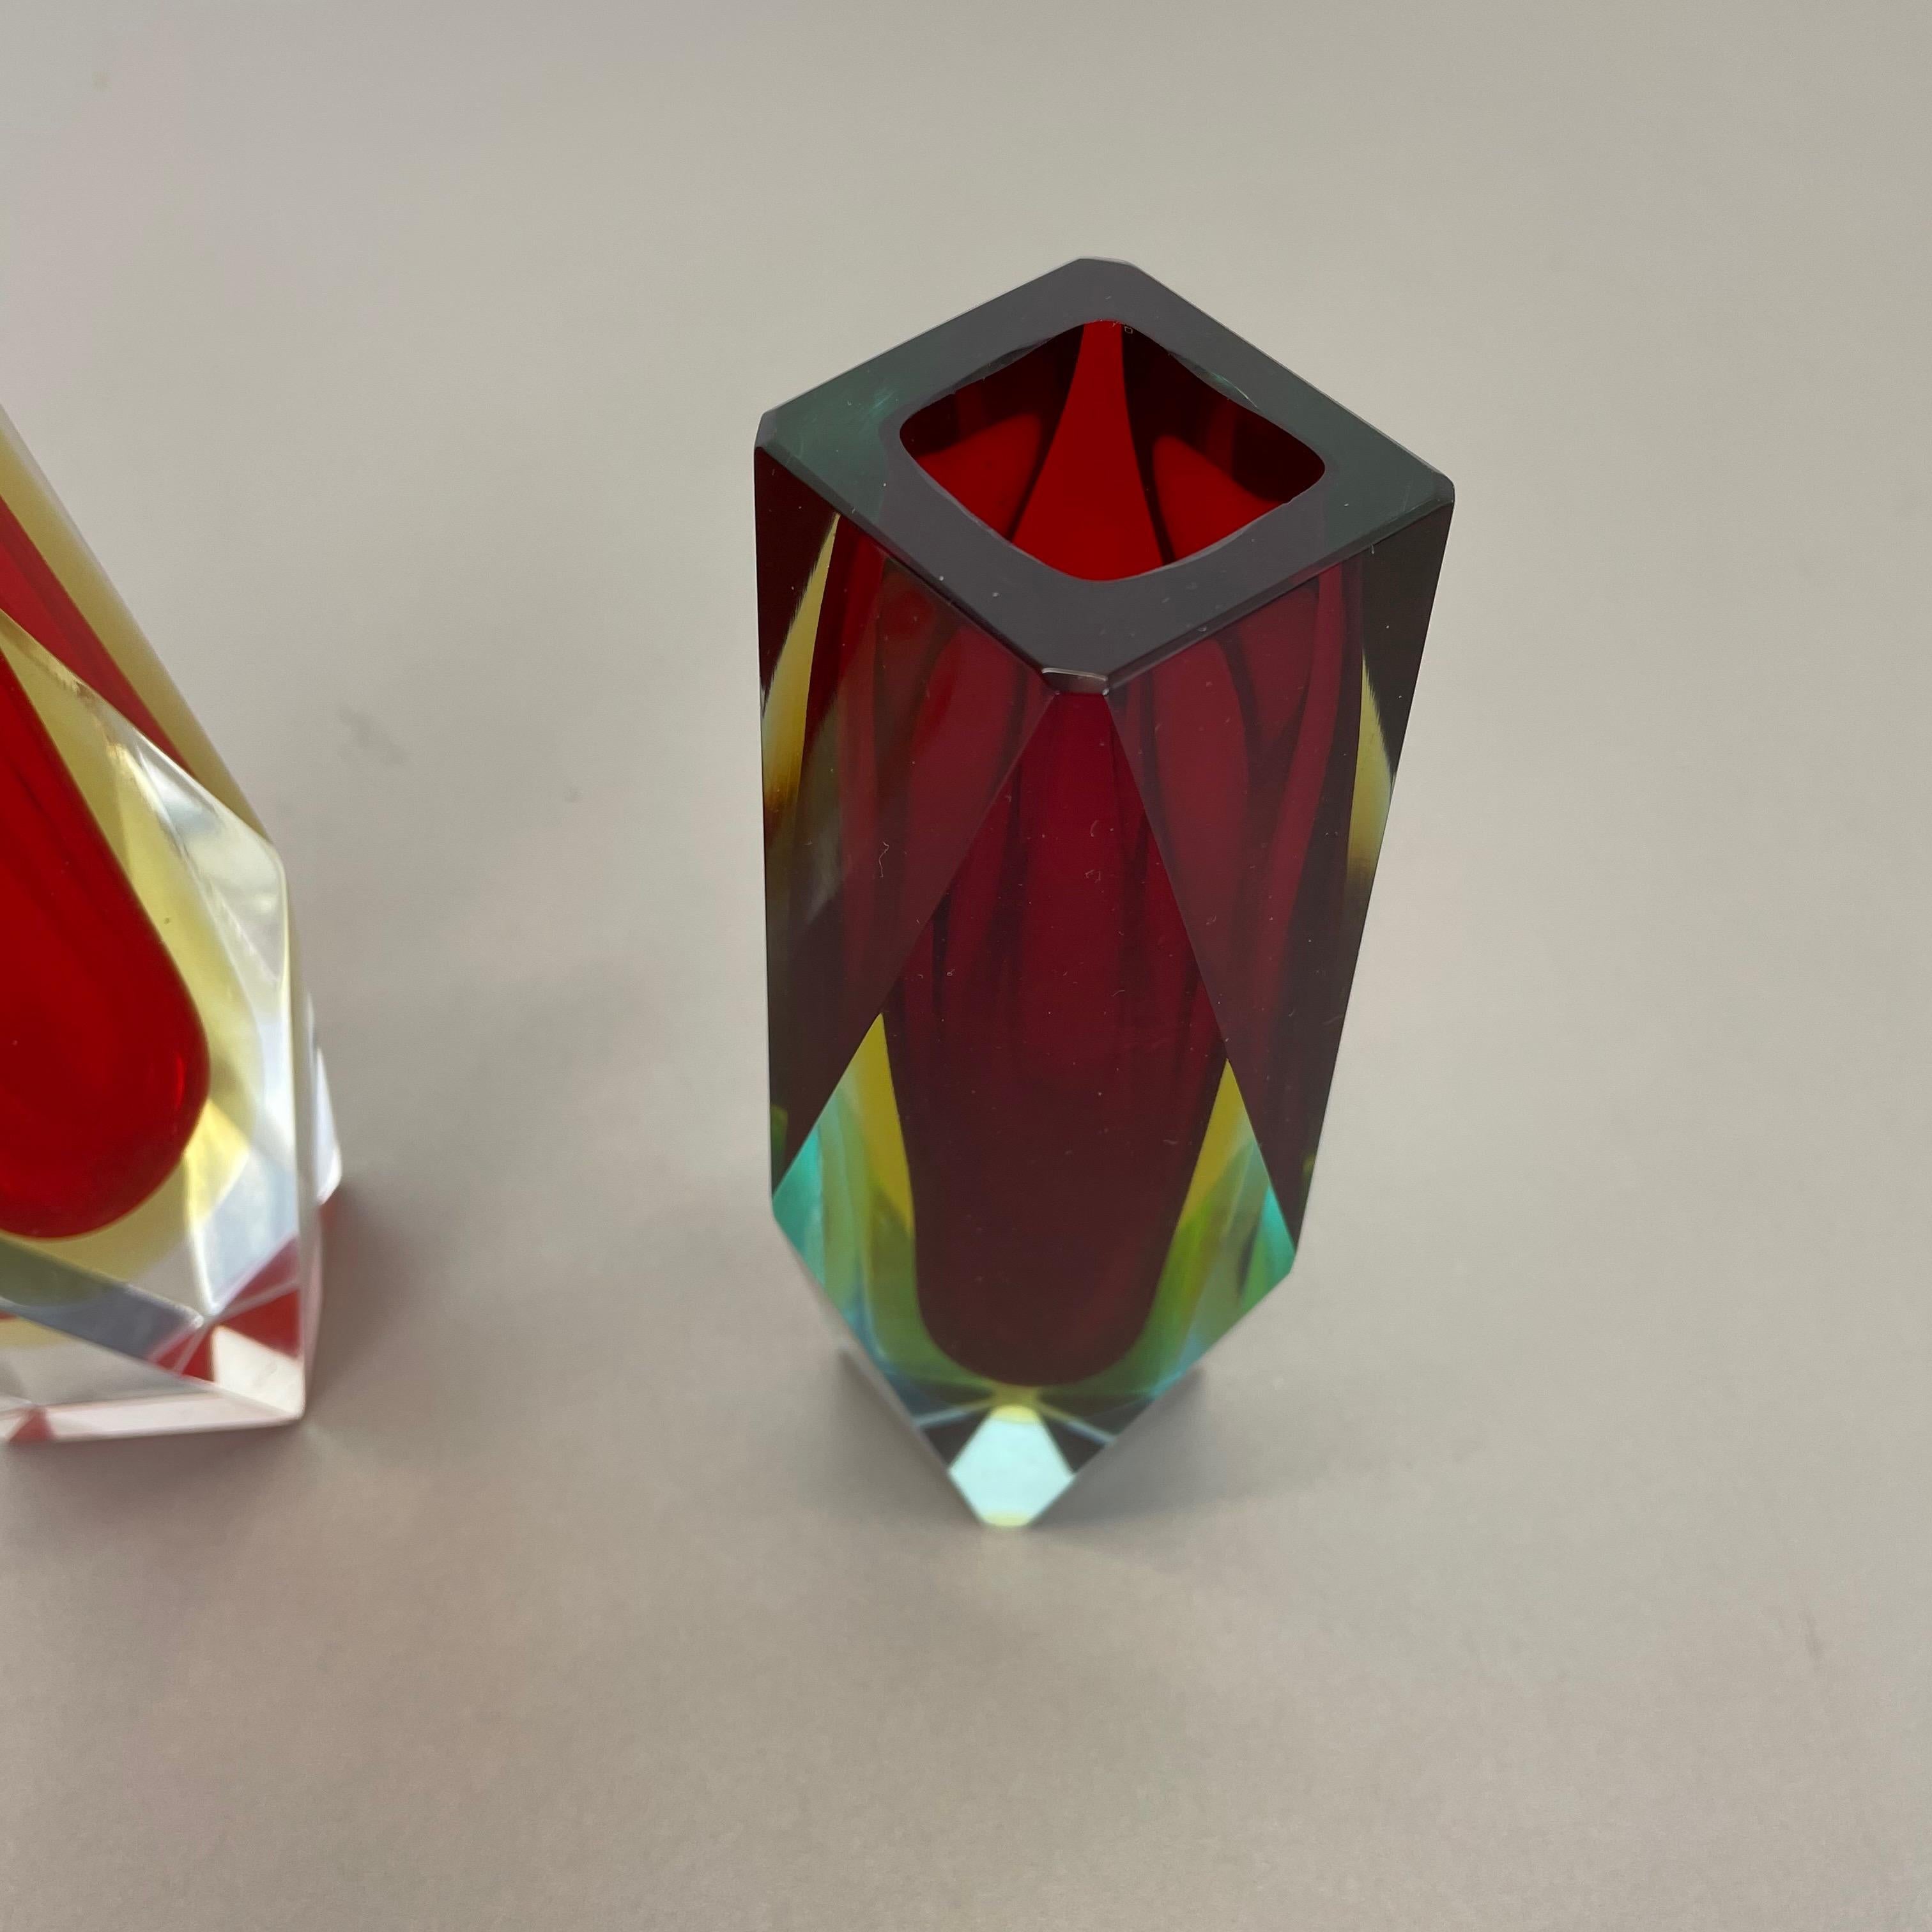 Set of 2 Faceted Murano Glass Sommerso Vase Designed by Flavio Poli Italy, 1970s For Sale 4